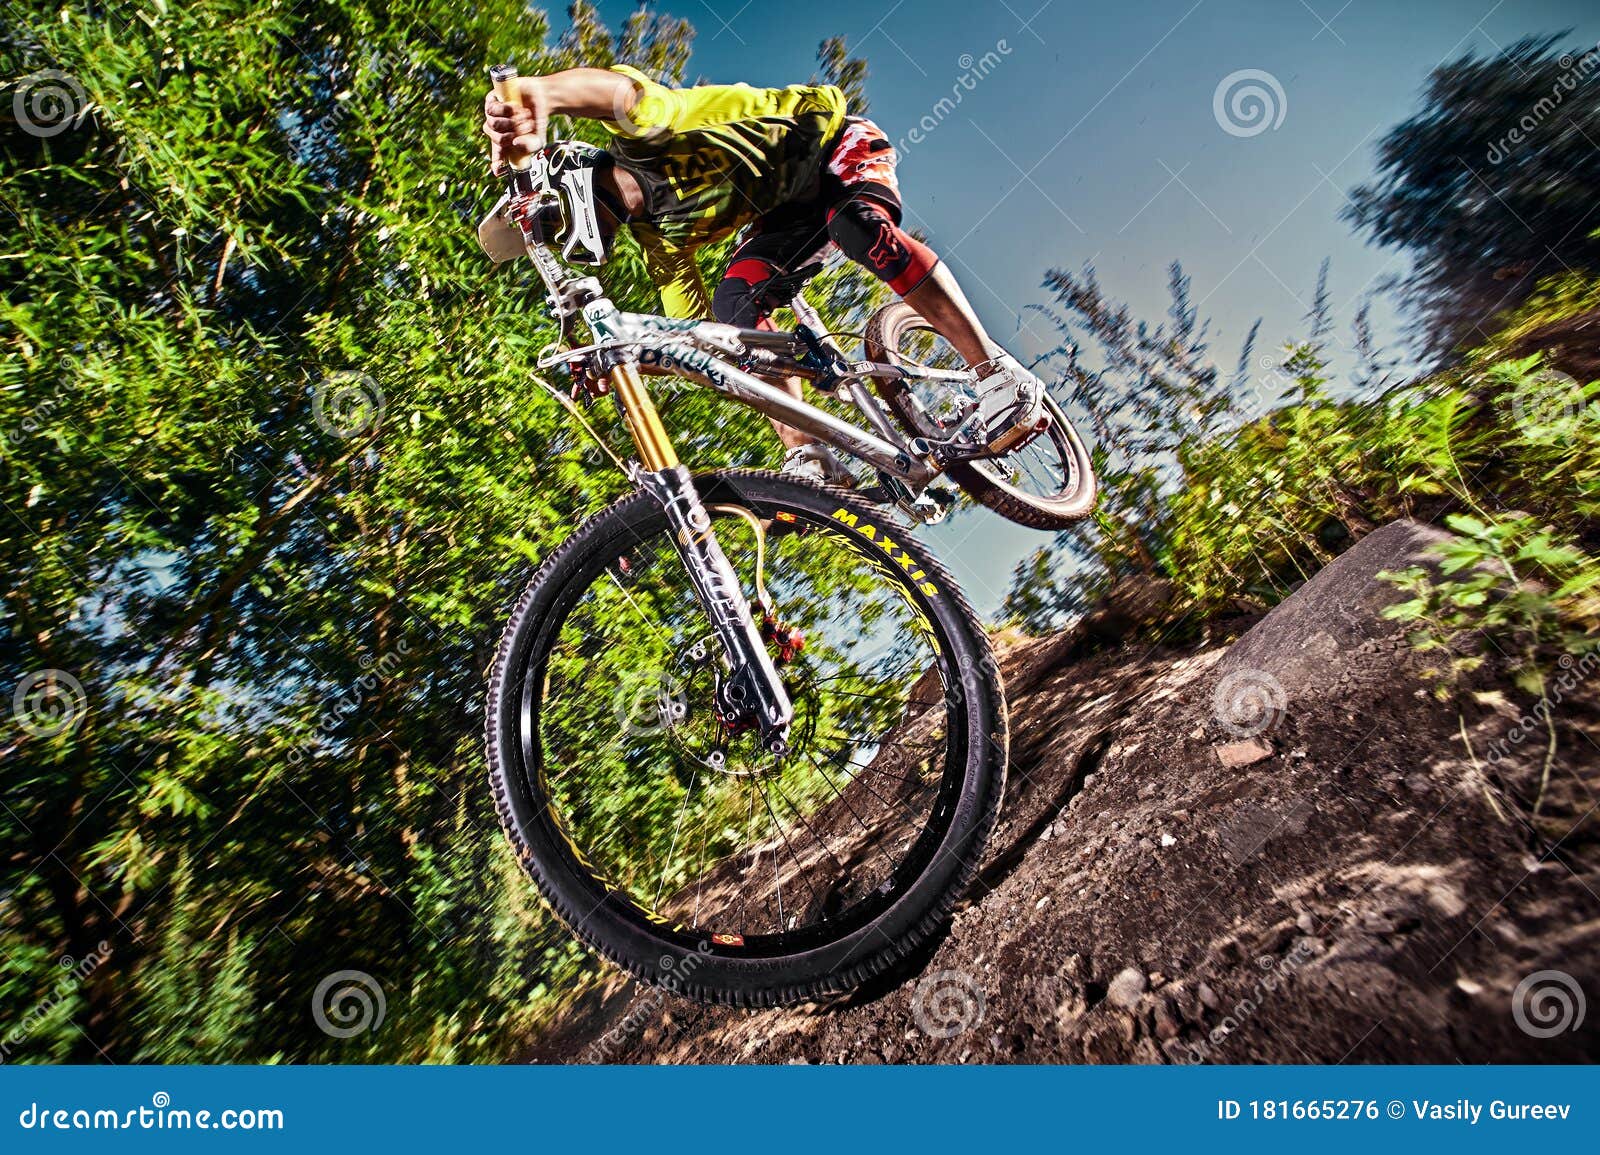 Rider in Action at Mountain Bike Sport. Editorial Photo - Image of ...